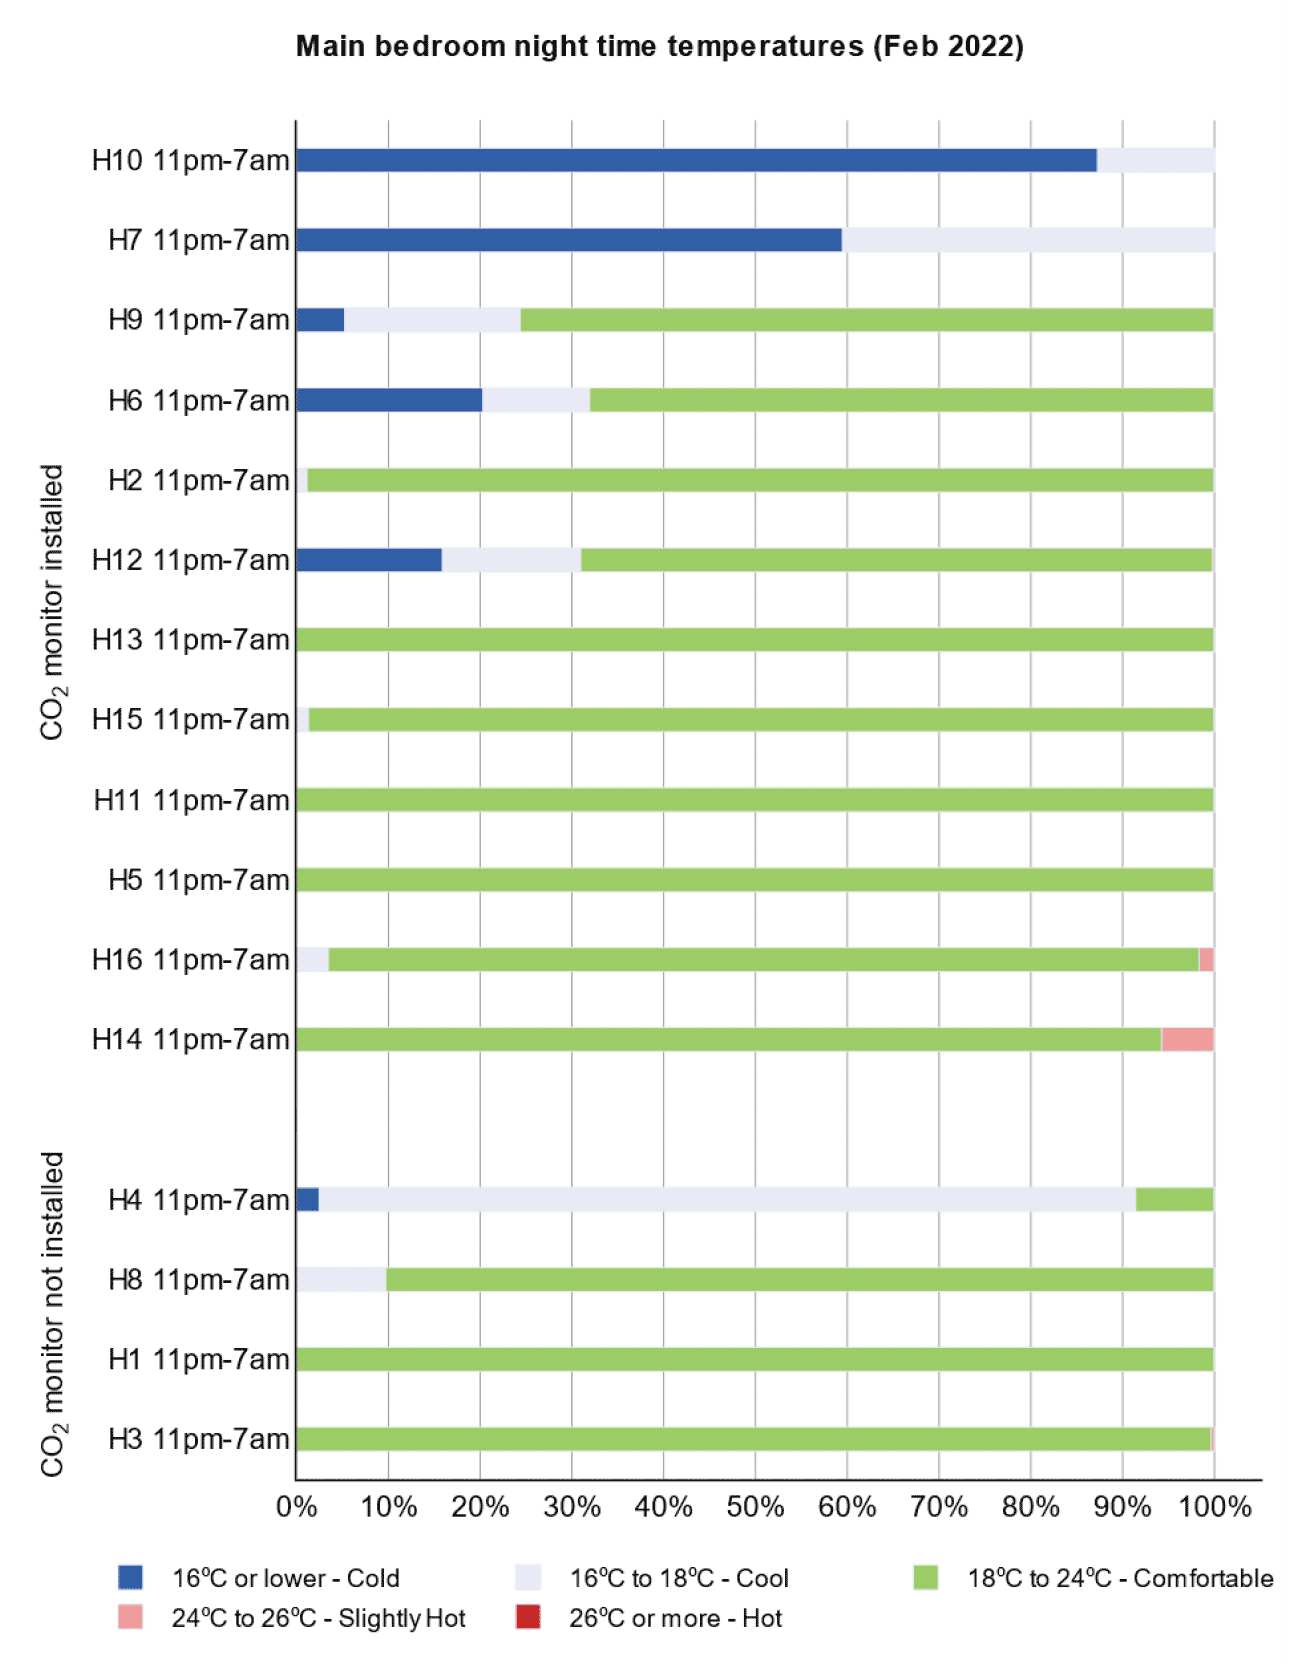 Bar chart indicating night time Winter temperatures in main bedrooms.